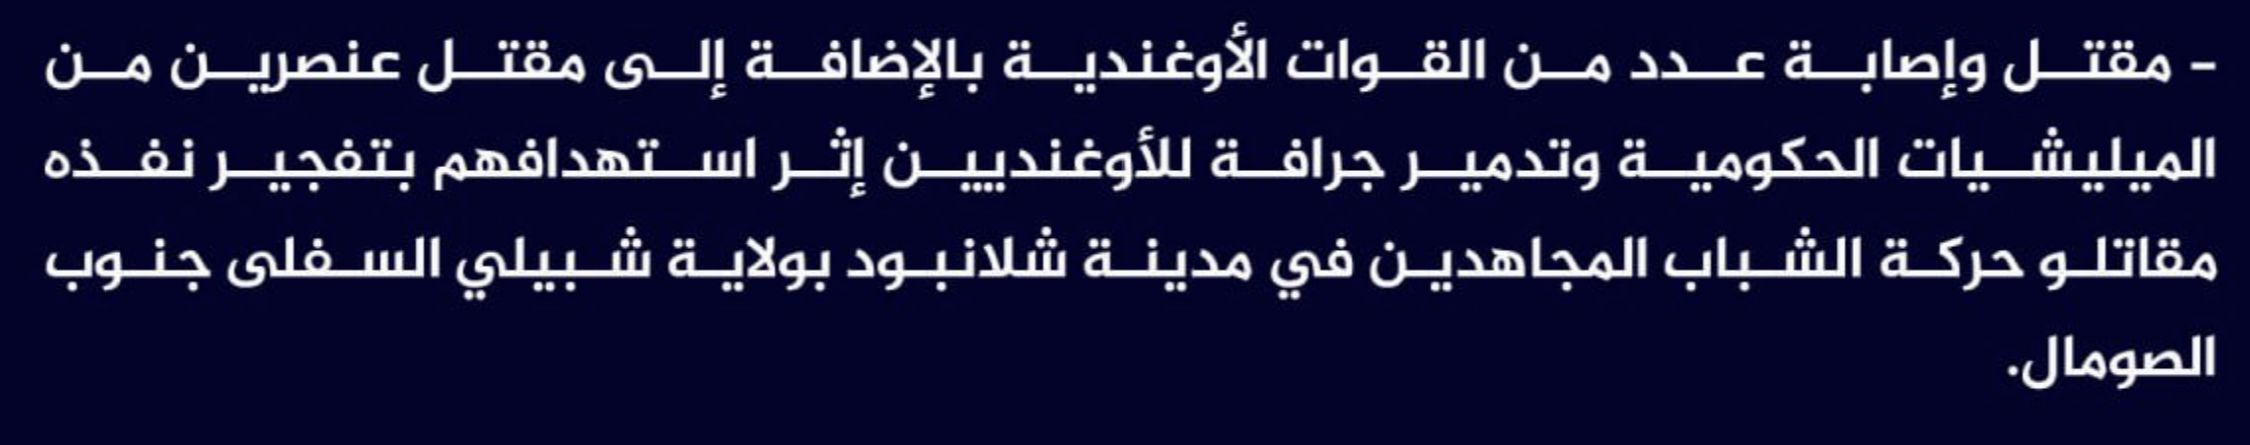 (Claim) al-Shabaab Killed and Injured Ugandan Forces, Destroyed a Bulldozer, and Killed Two Somalian Forces in an IED Attack in Shalanbud City, Lower Shabelle State, Southern Somalia - 2 March 2023